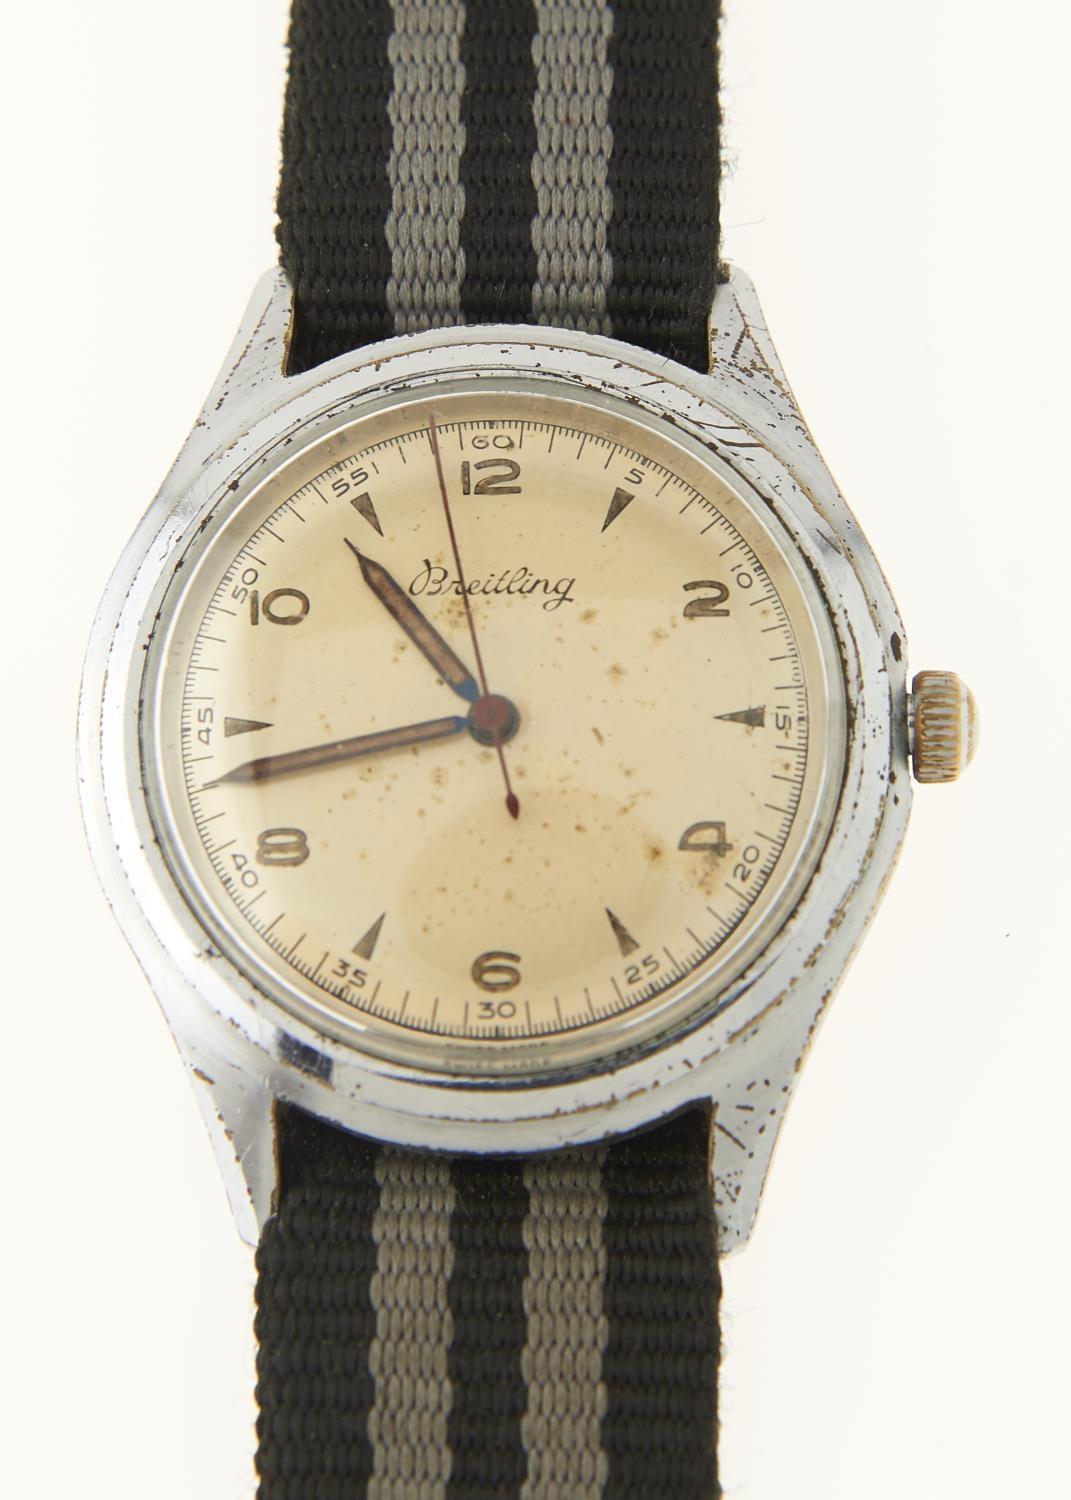 A BREITLING STAINLESS STEEL GENTLEMAN'S WRISTWATCH, 33MM DIAM, MARKED ON CASE BACK 374279/112